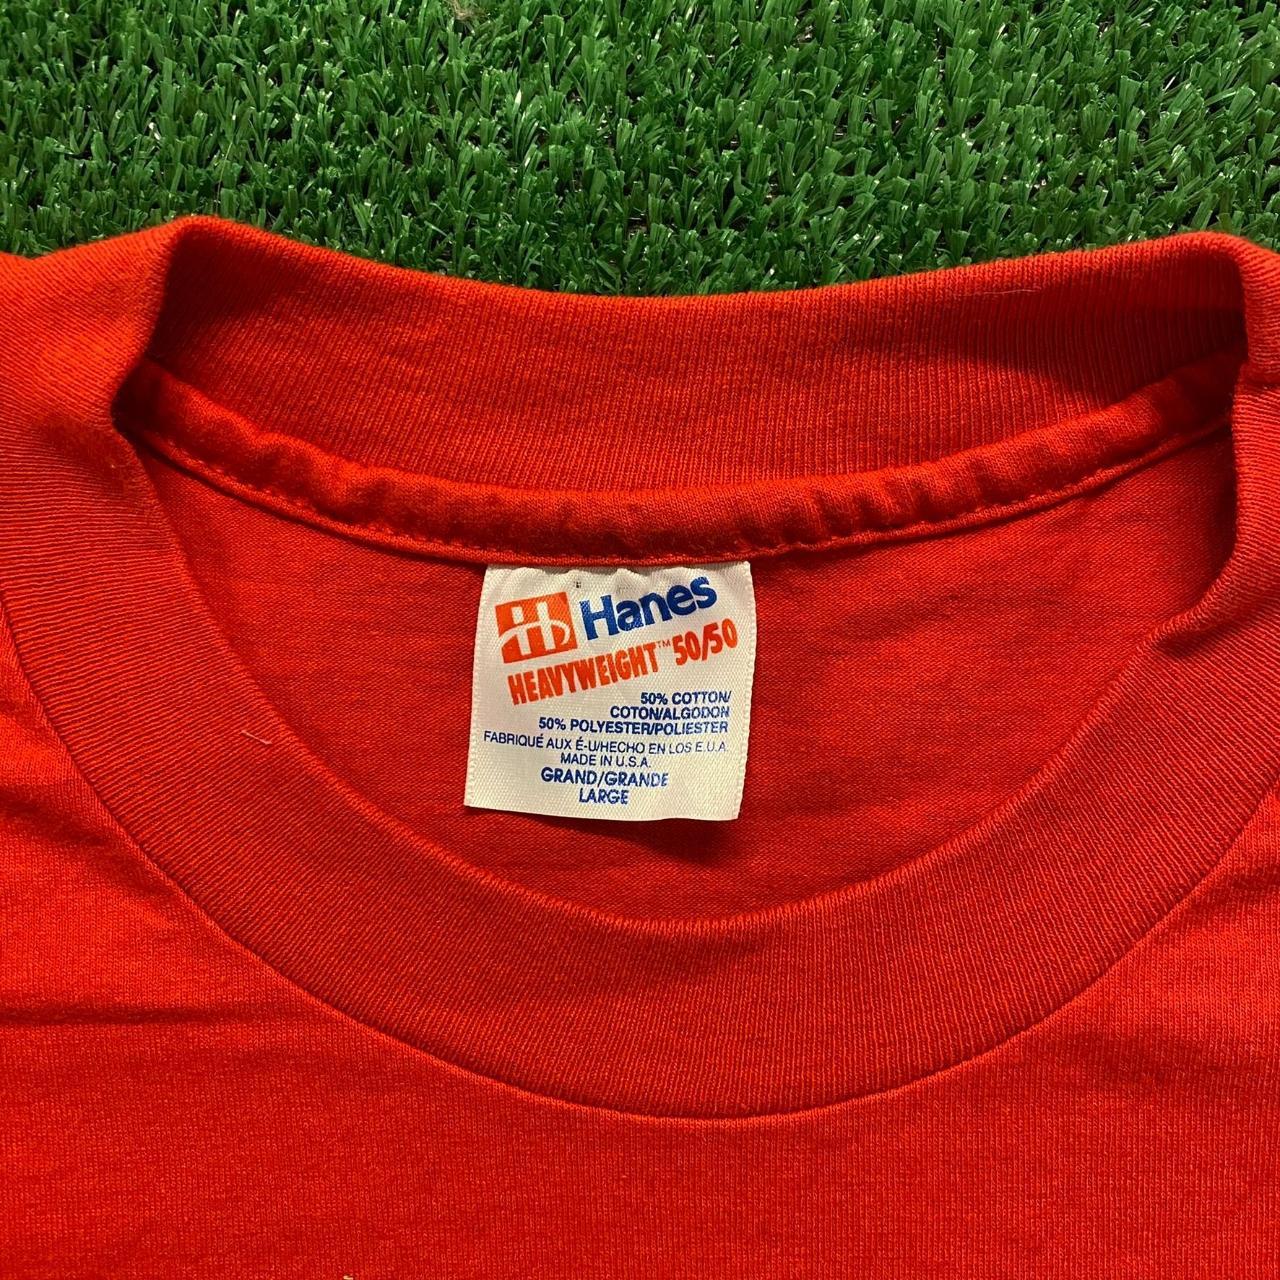 I bought this supreme x hanes t for 20 euro from a resell shop. But the  hanes tag is red and I don't see it. Is the shirt legit? : r/LegitCheck